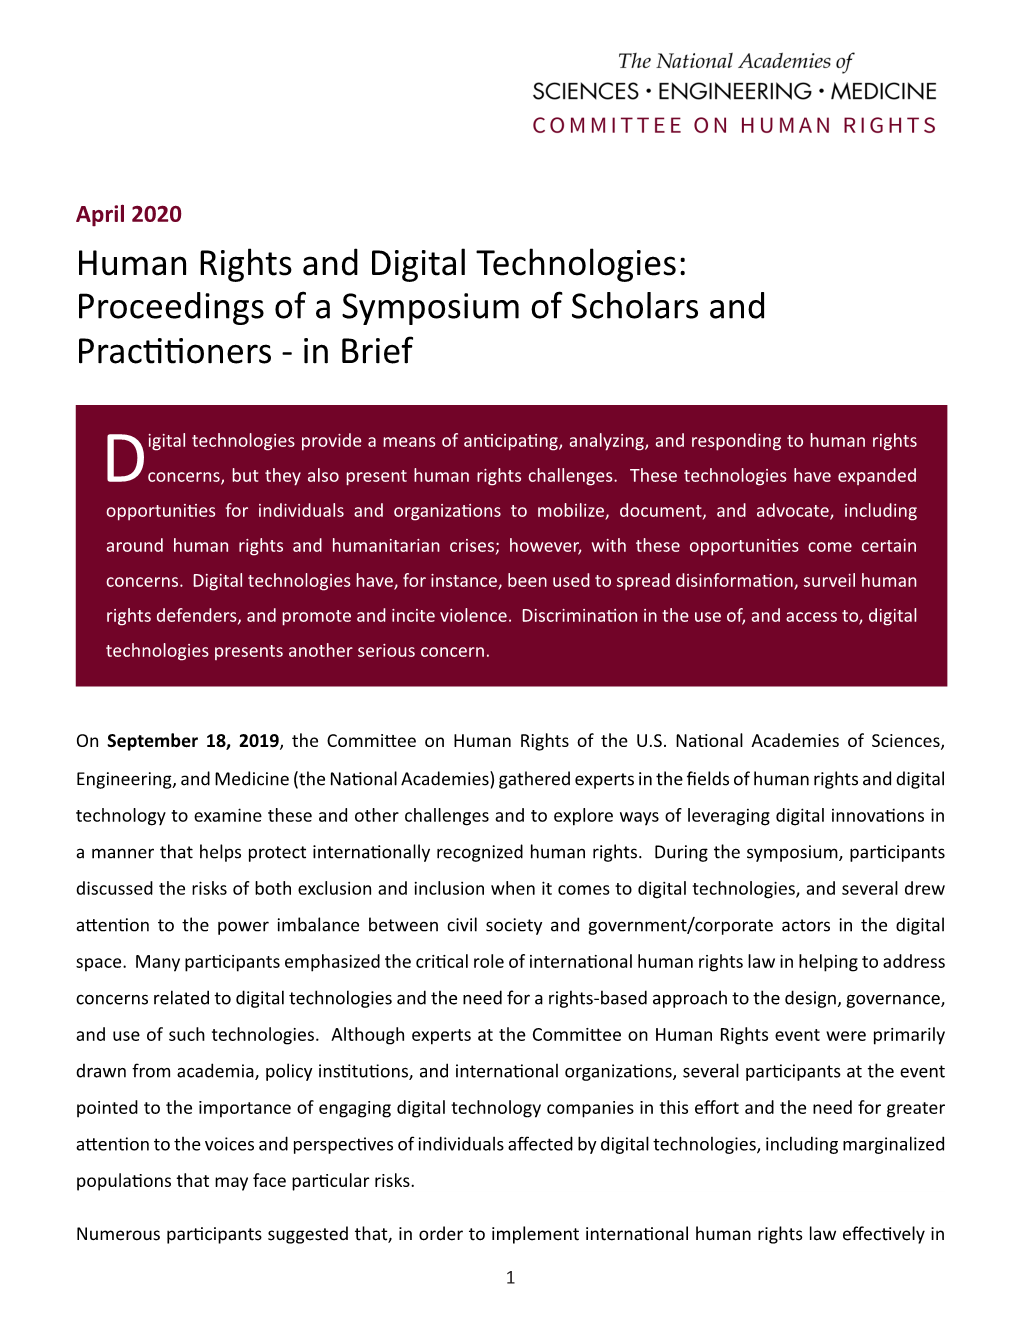 Human Rights and Digital Technologies: Proceedings of a Symposium of Scholars and Practitioners - in Brief